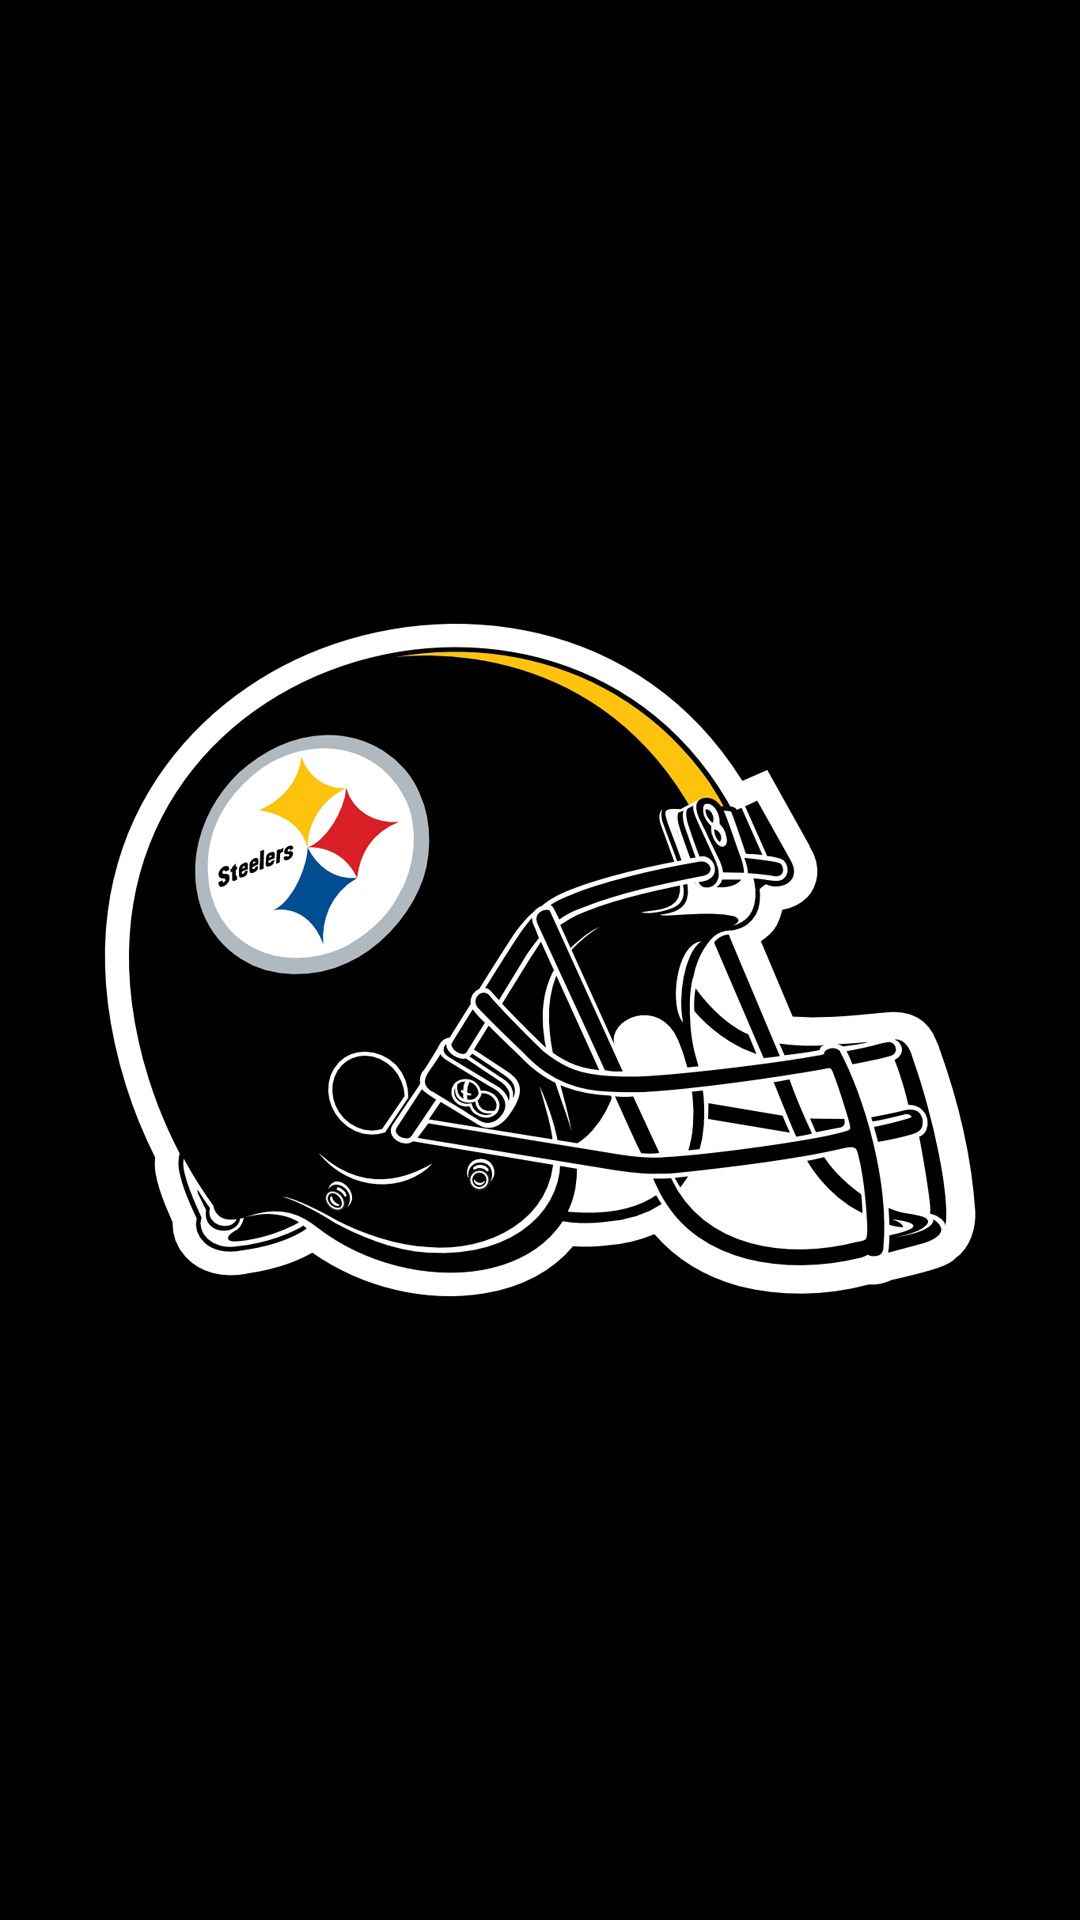 Download Show Your Steelers Pride with This iPhone Wallpaper  Wallpapers com